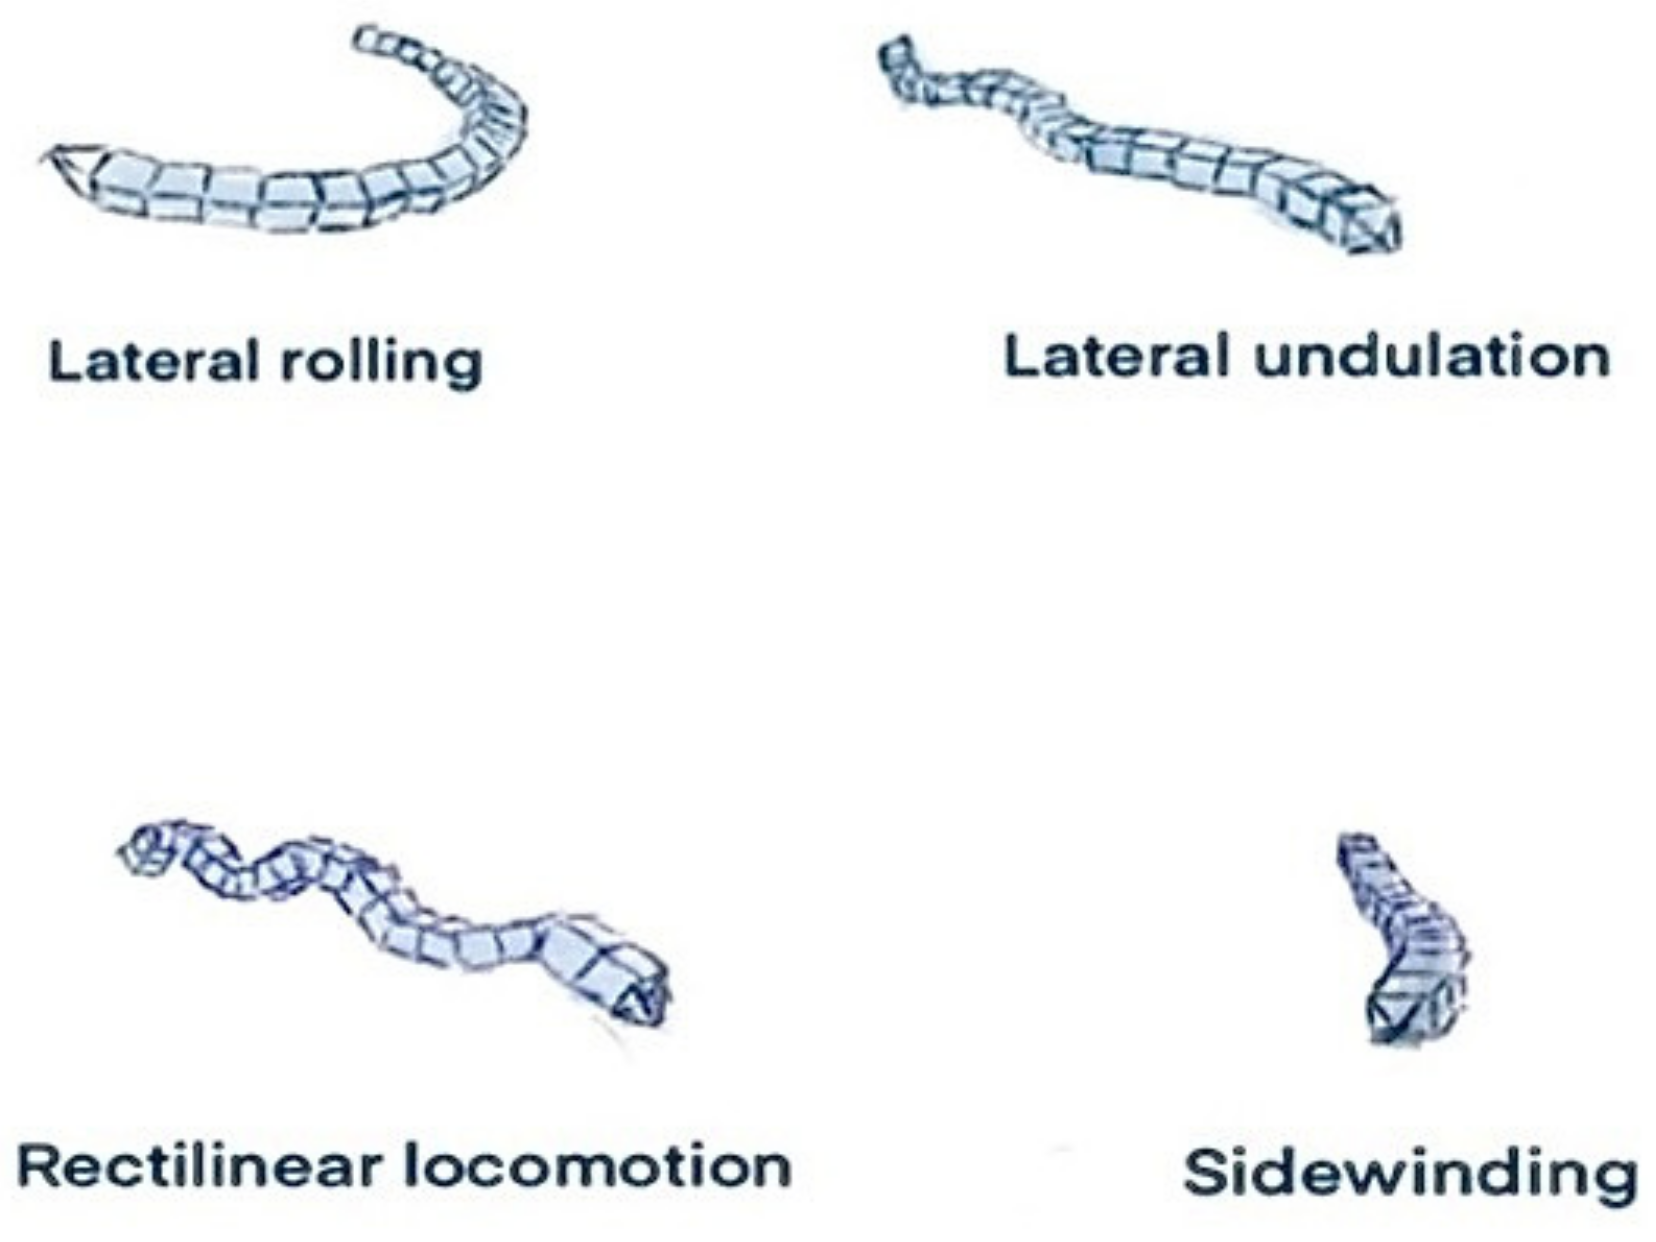 1: The snake robot ACM III (left), which was the world's first snake